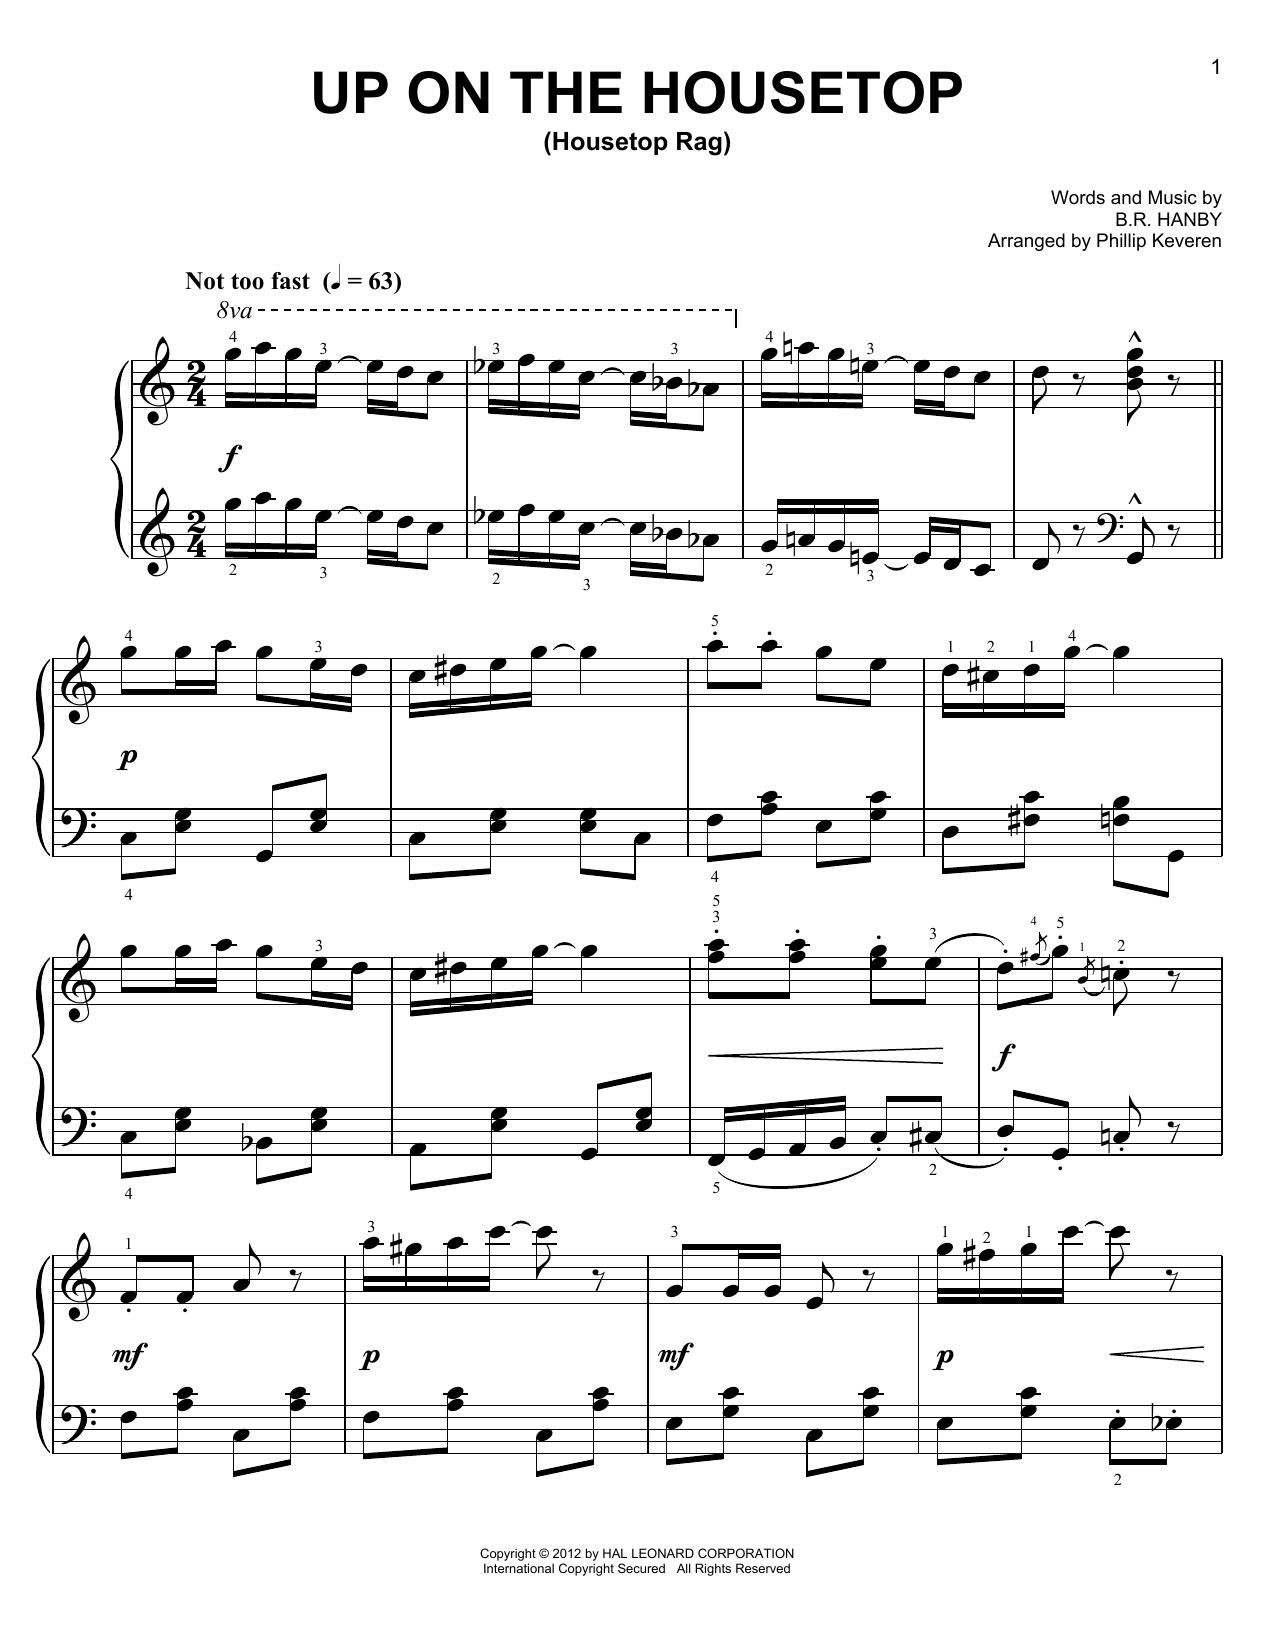 Download B.R. Hanby Up On The Housetop [Ragtime version] (a Sheet Music